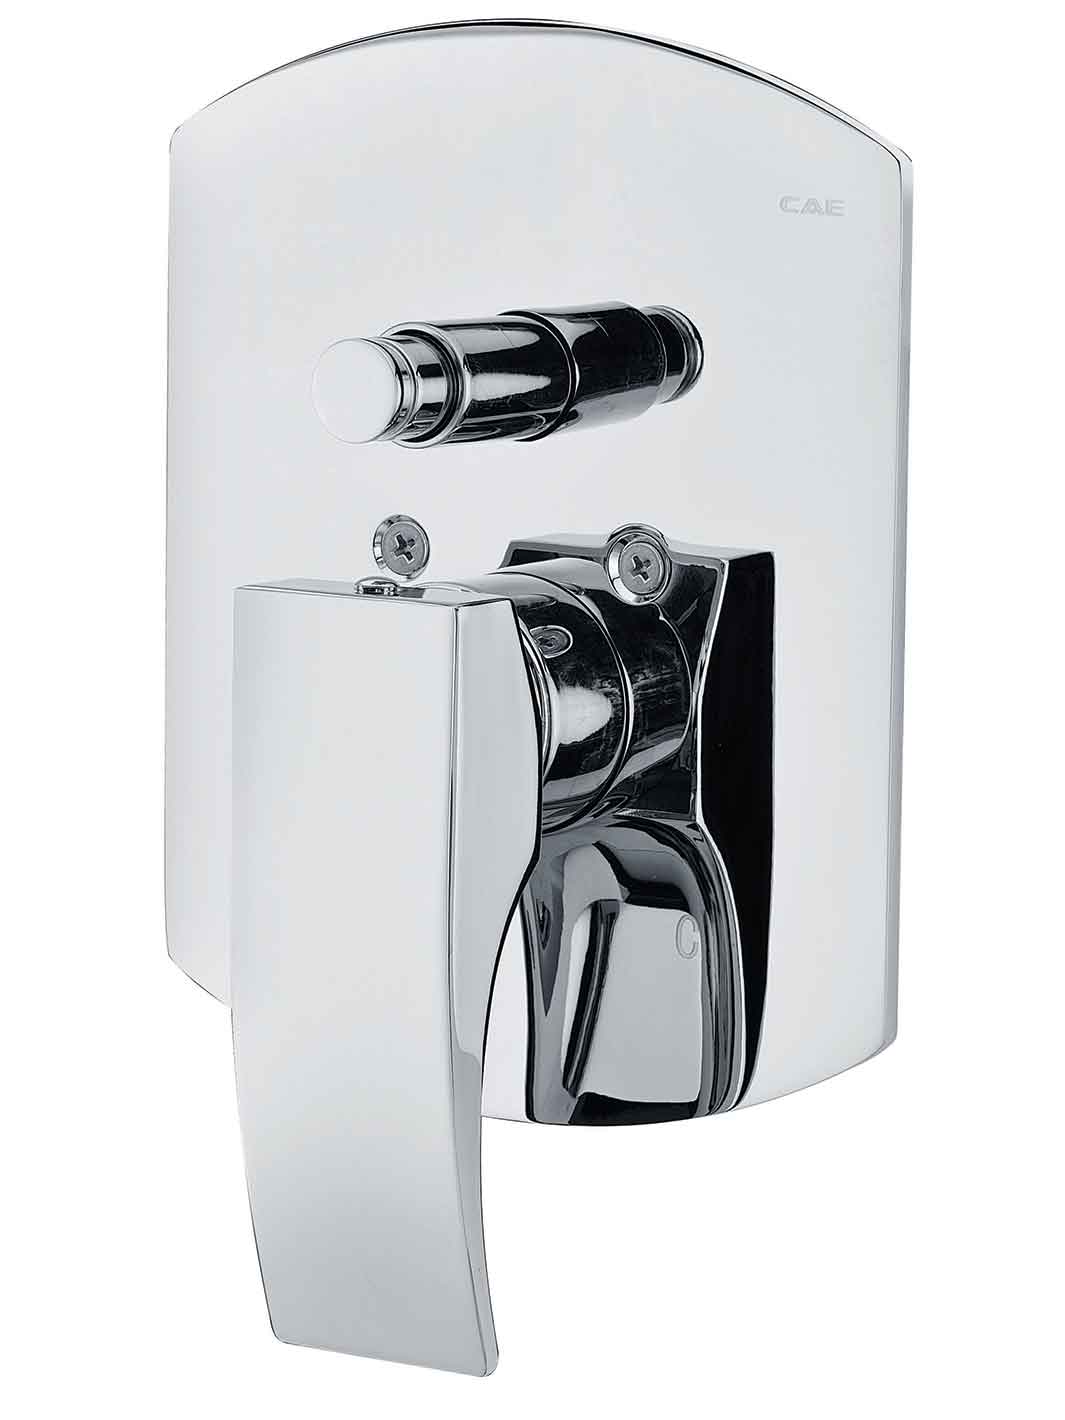 Single Lever Dual Controller for Tub & Shower